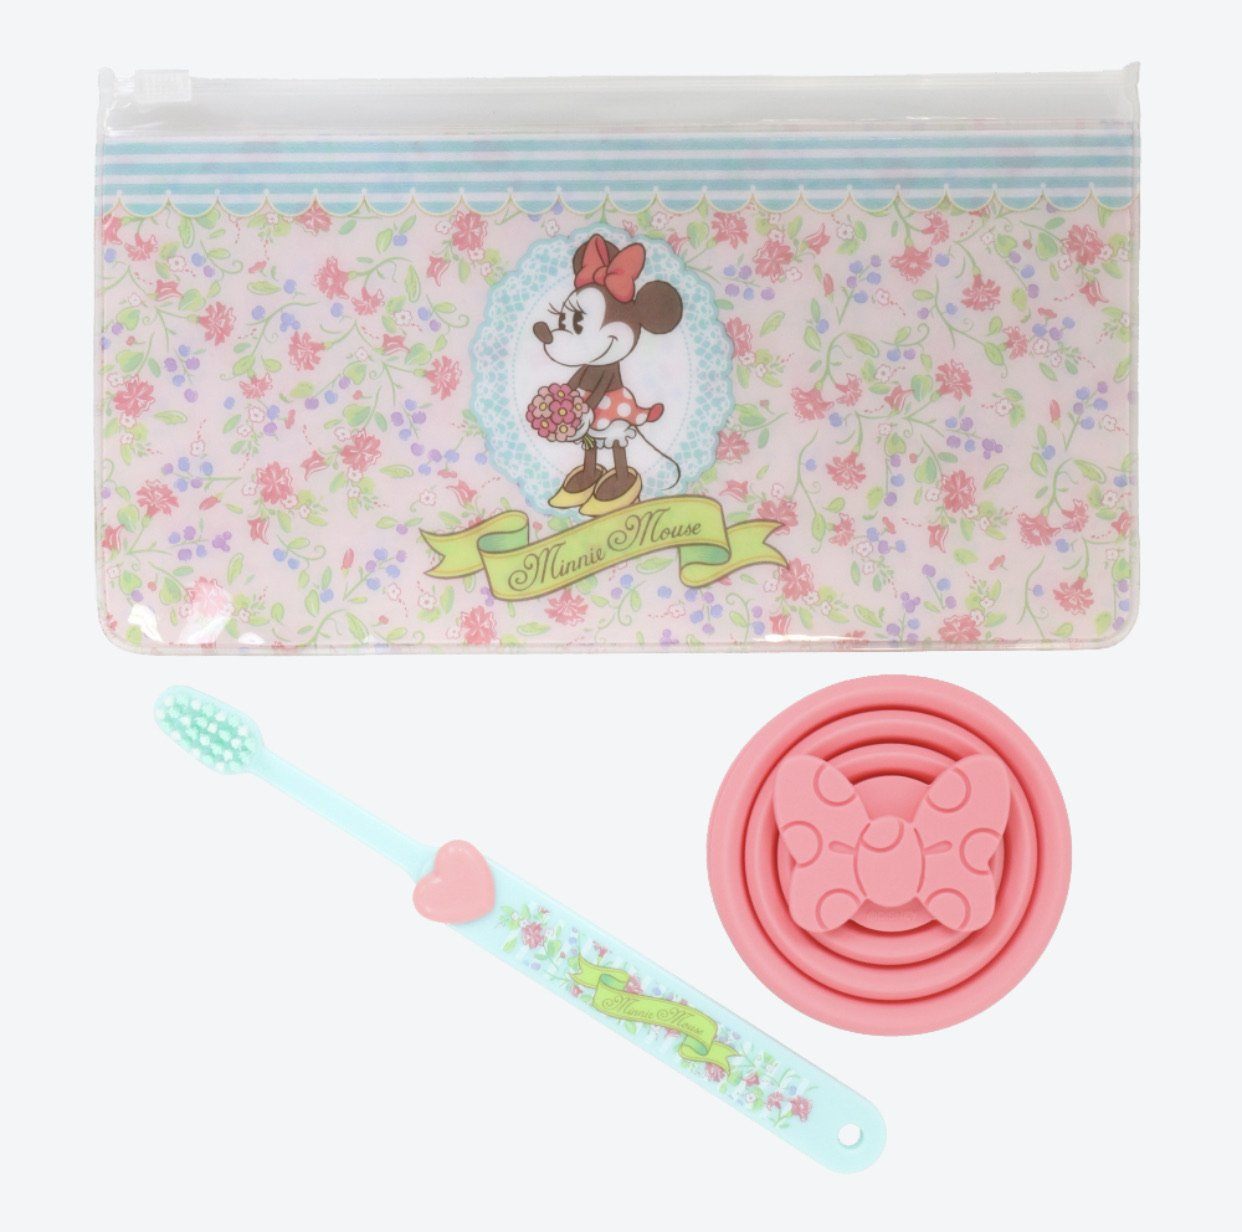 TDR - Toothbrush & Silicone Collapsible Travel Cup Set x Minnie Mouse